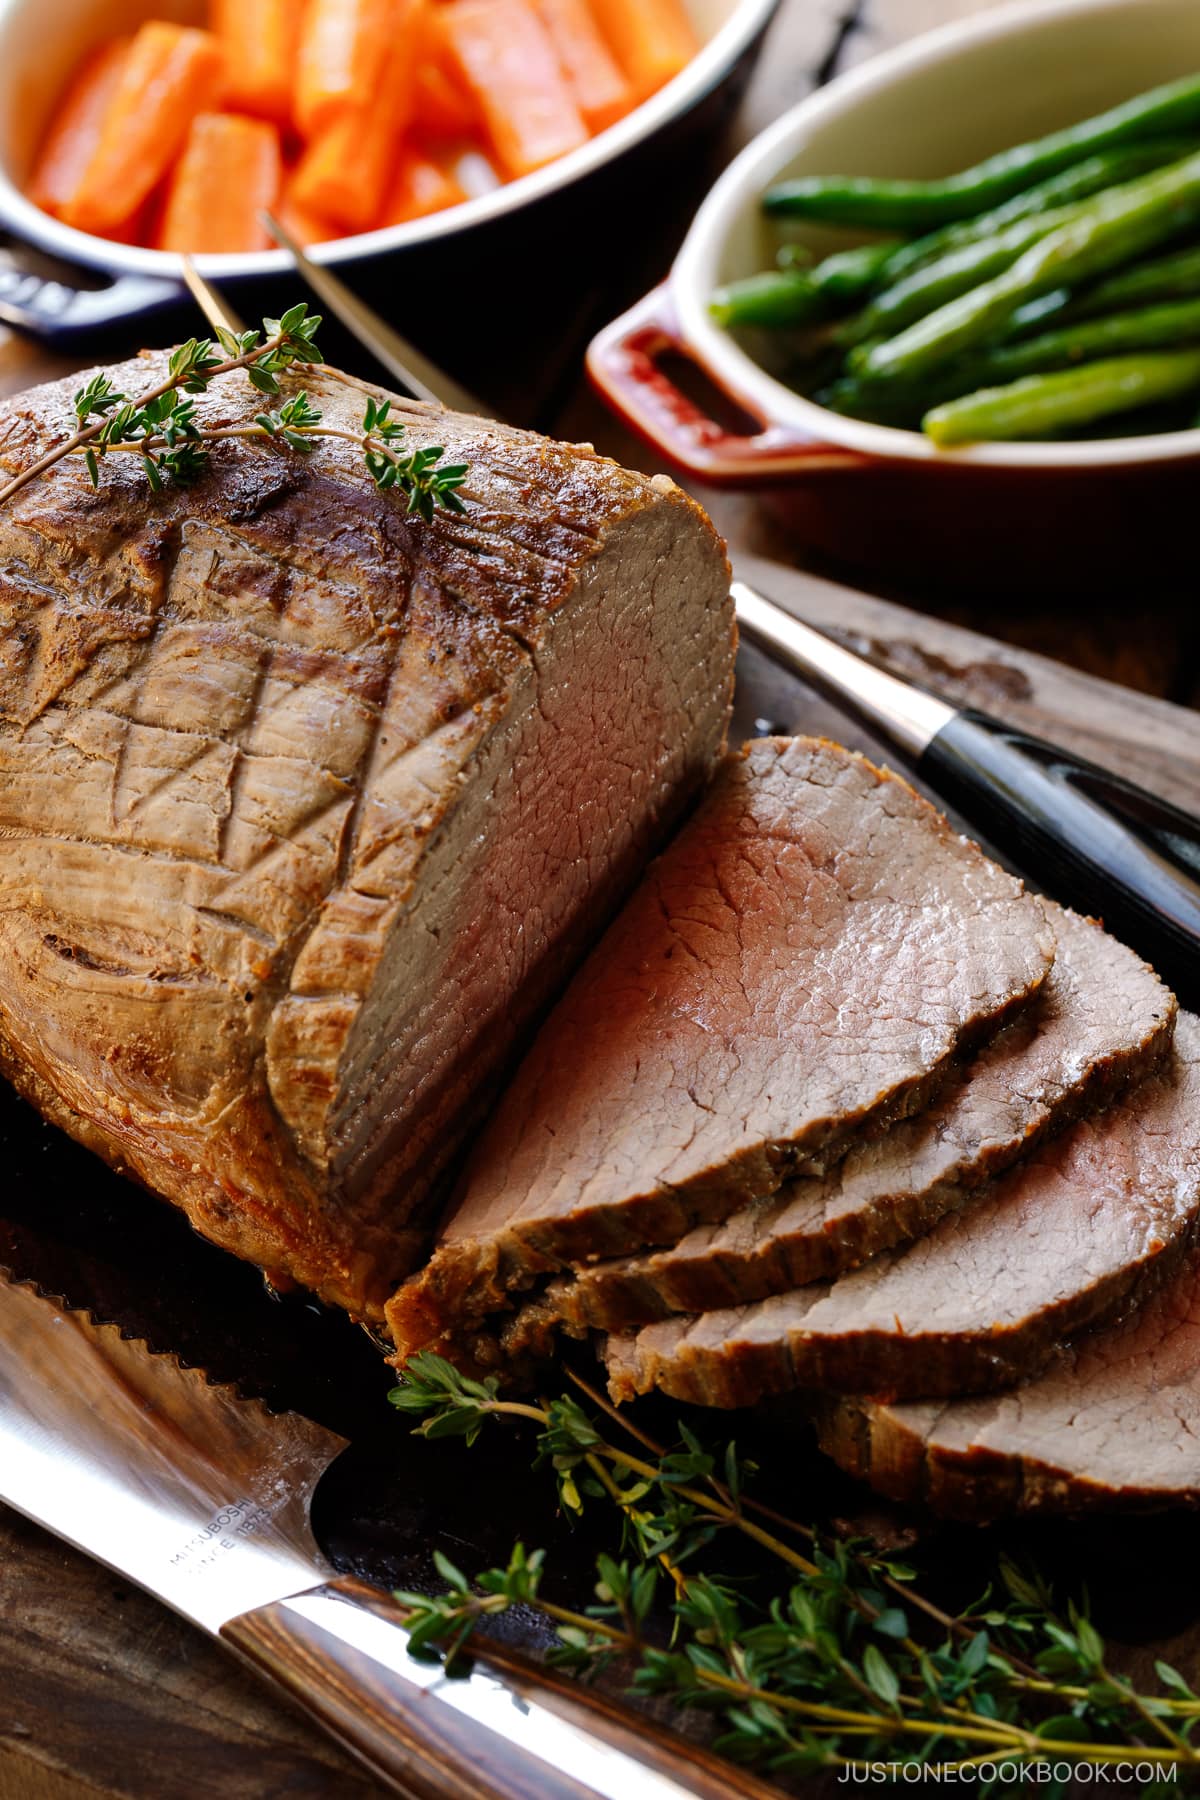 A roast beef being thinly sliced on the wooden cutting board garnished with thyme.